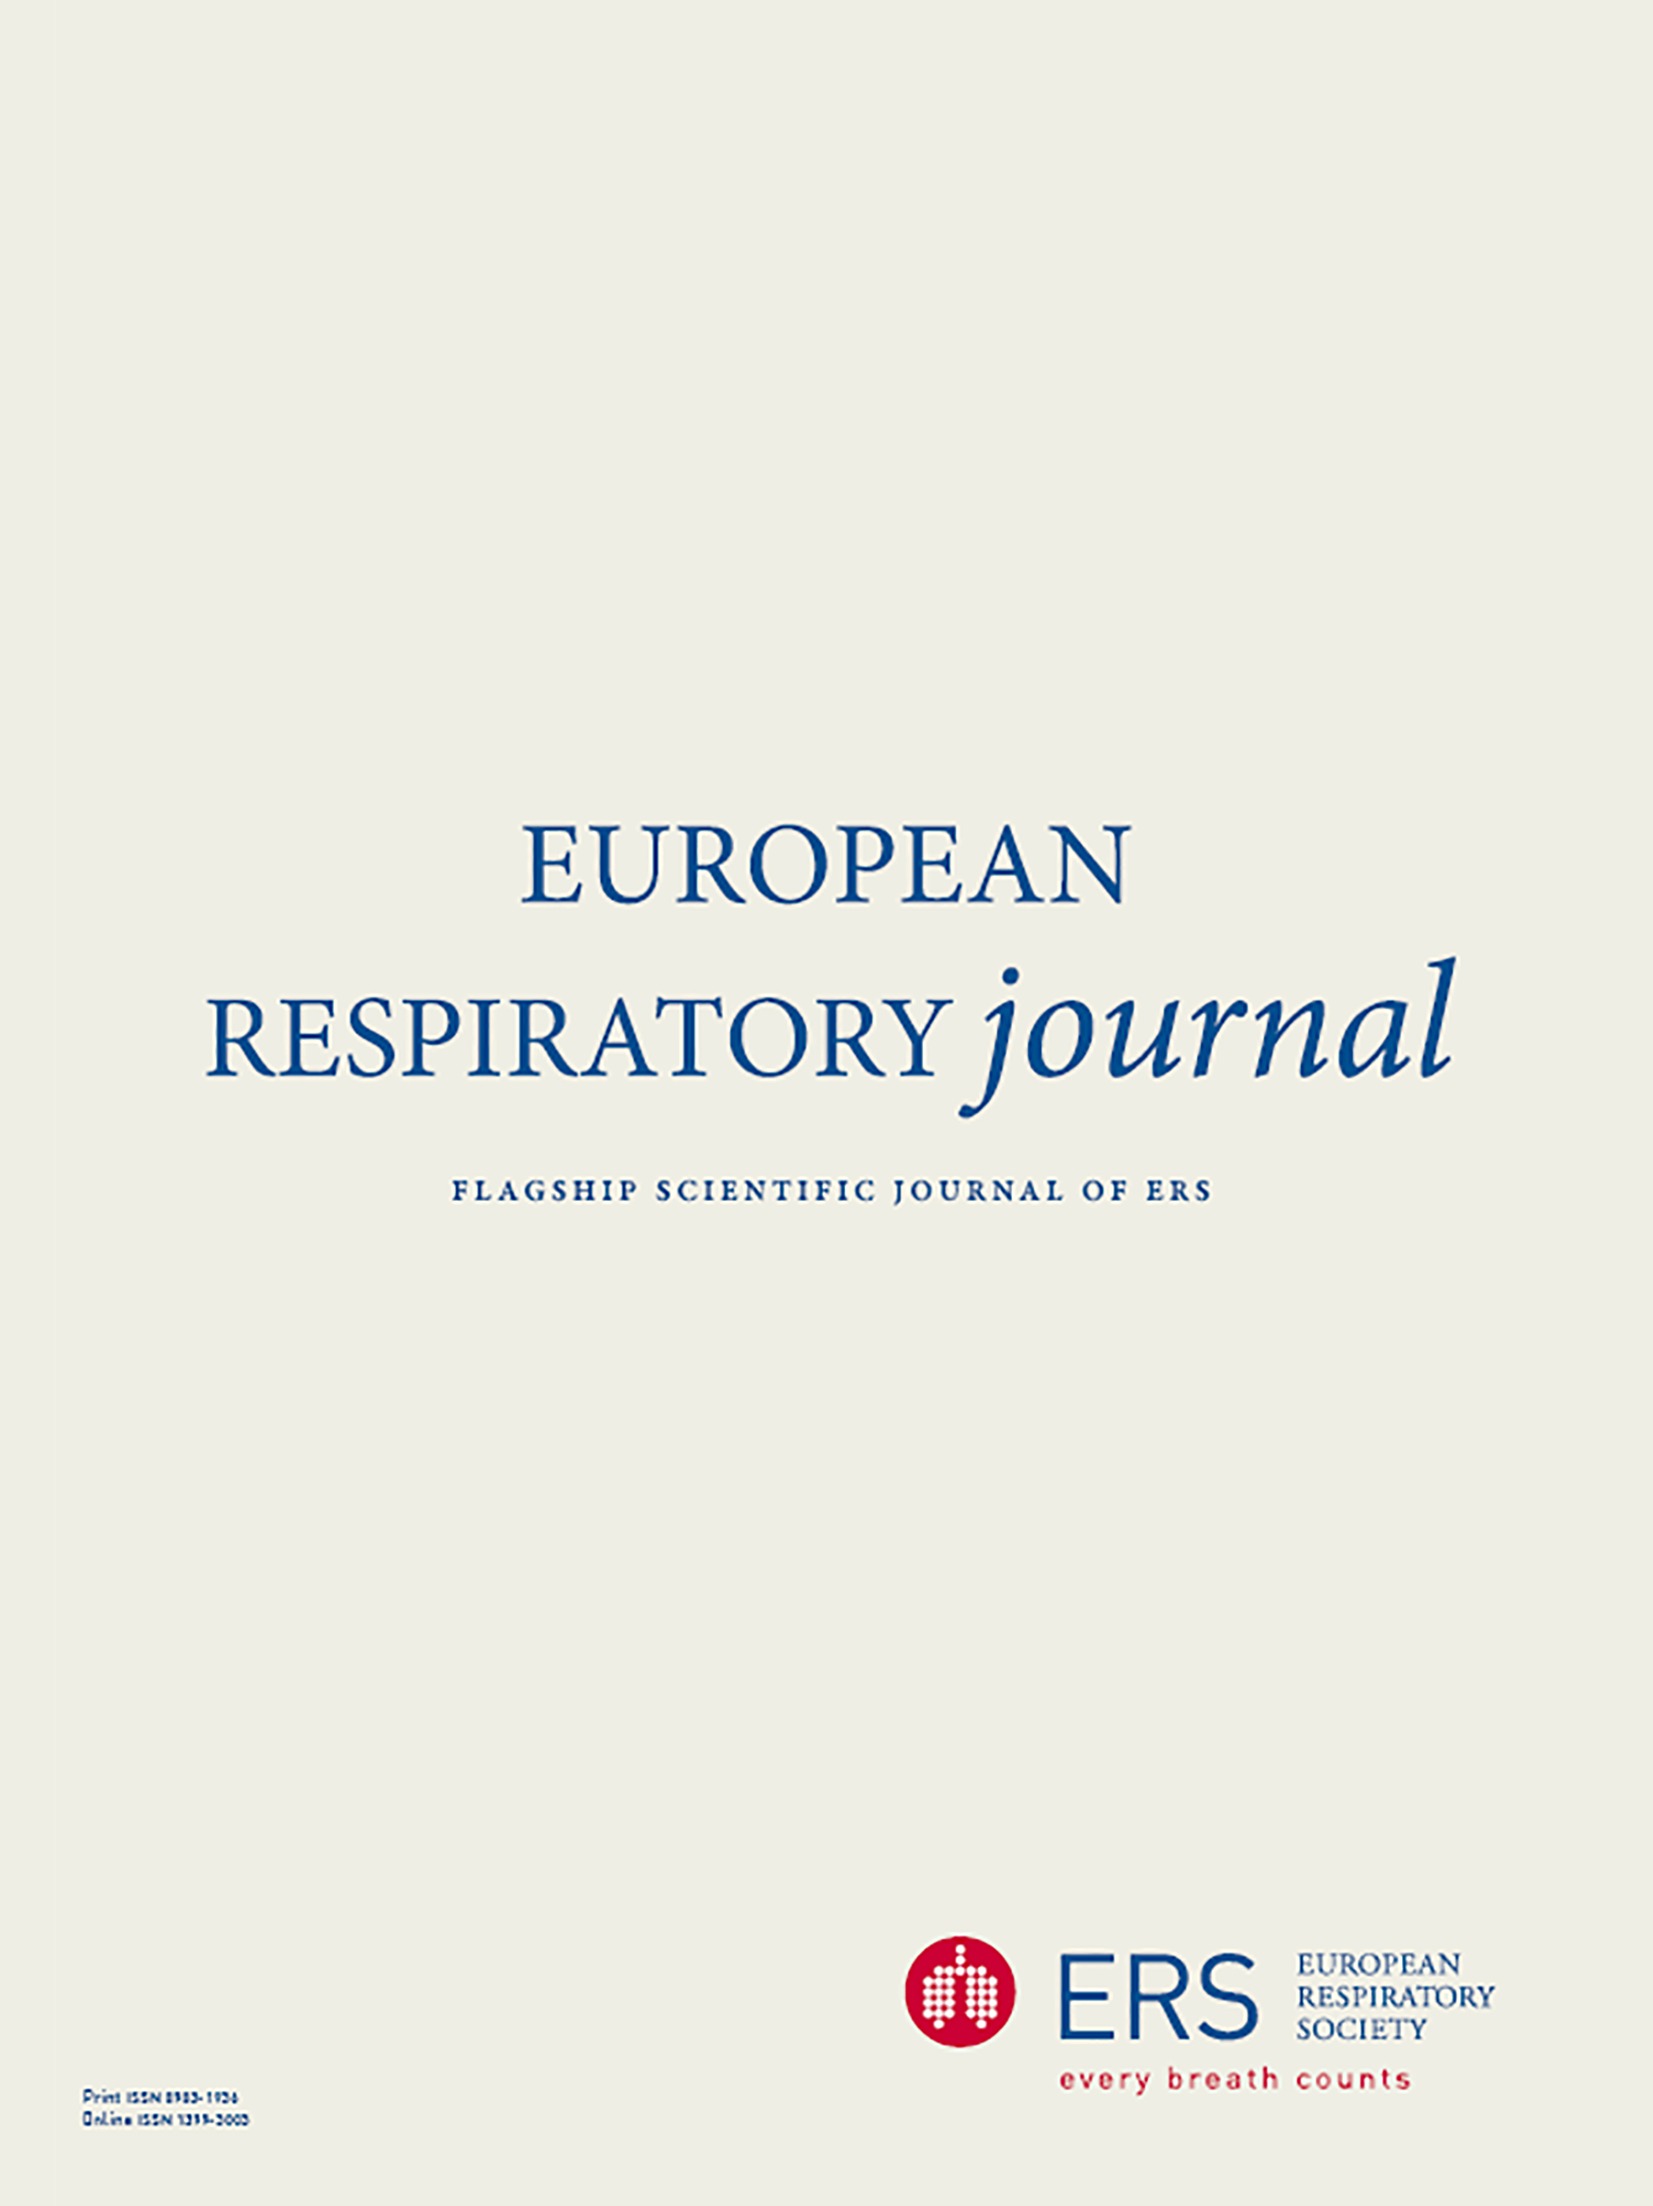 Long-term safety and efficacy of elexacaftor/tezacaftor/ivacaftor in people with cystic fibrosis and at least one F508del allele: 144-week interim results from a 192-week open-label extension study